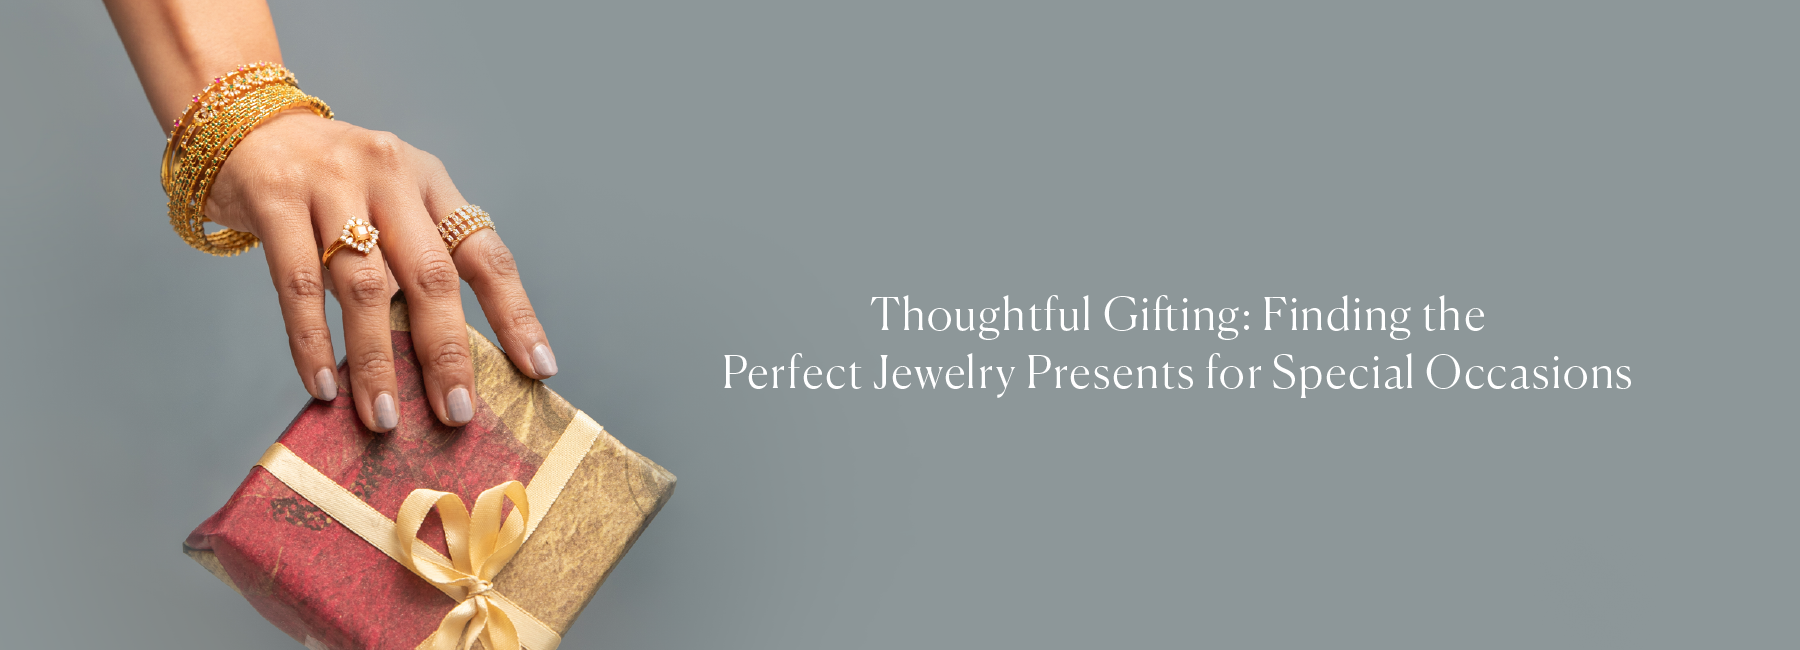 Thoughtful Gifting: Finding the Perfect Jewelry Presents for Special Occasions